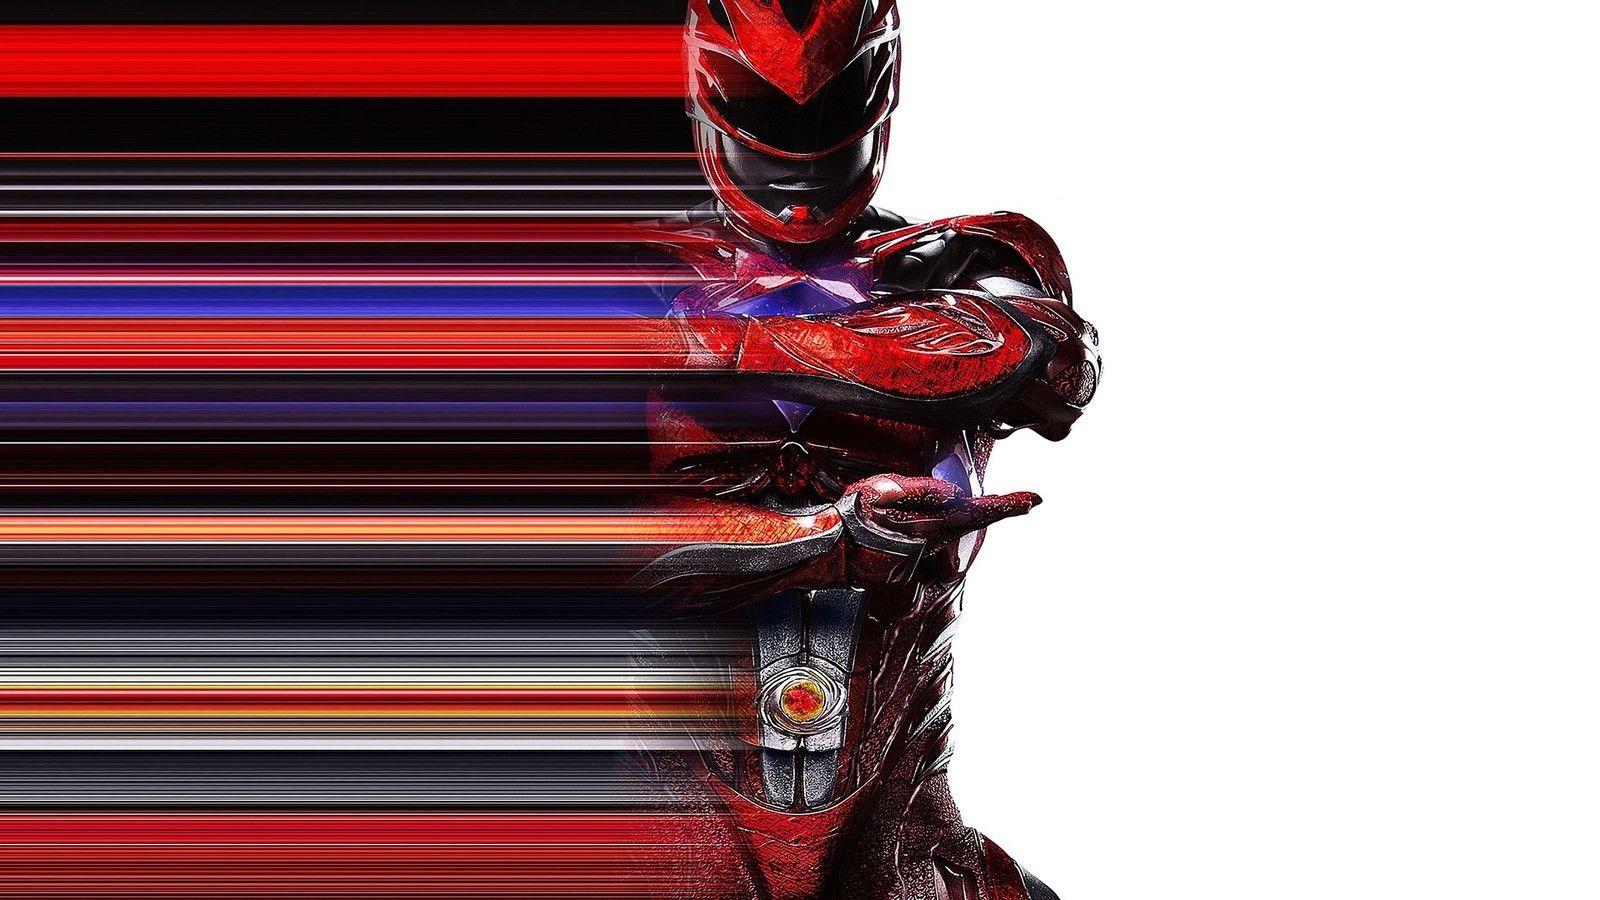 It's Morphin' Time with these Power Rangers wallpaper